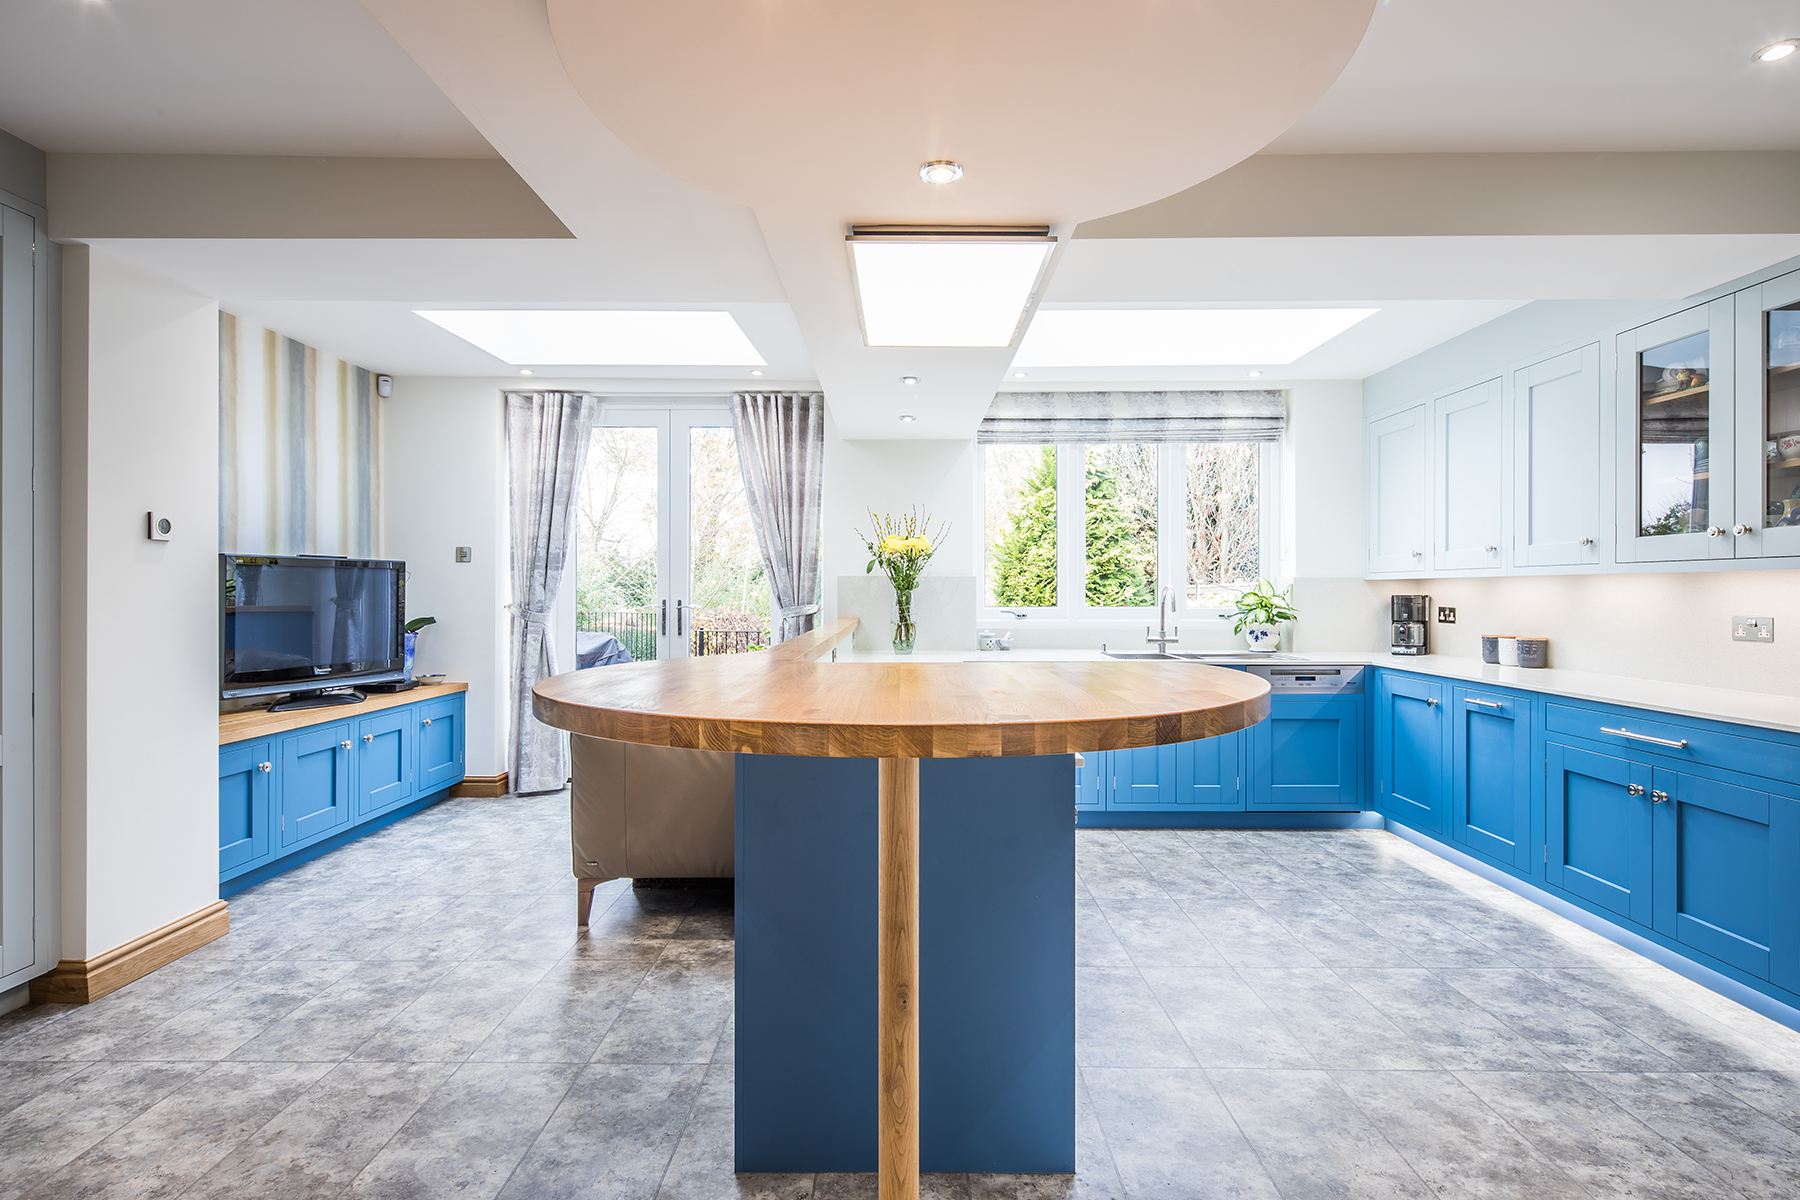 Sheffield Sustainable Kitchens The Guild Of Master Craftsmen